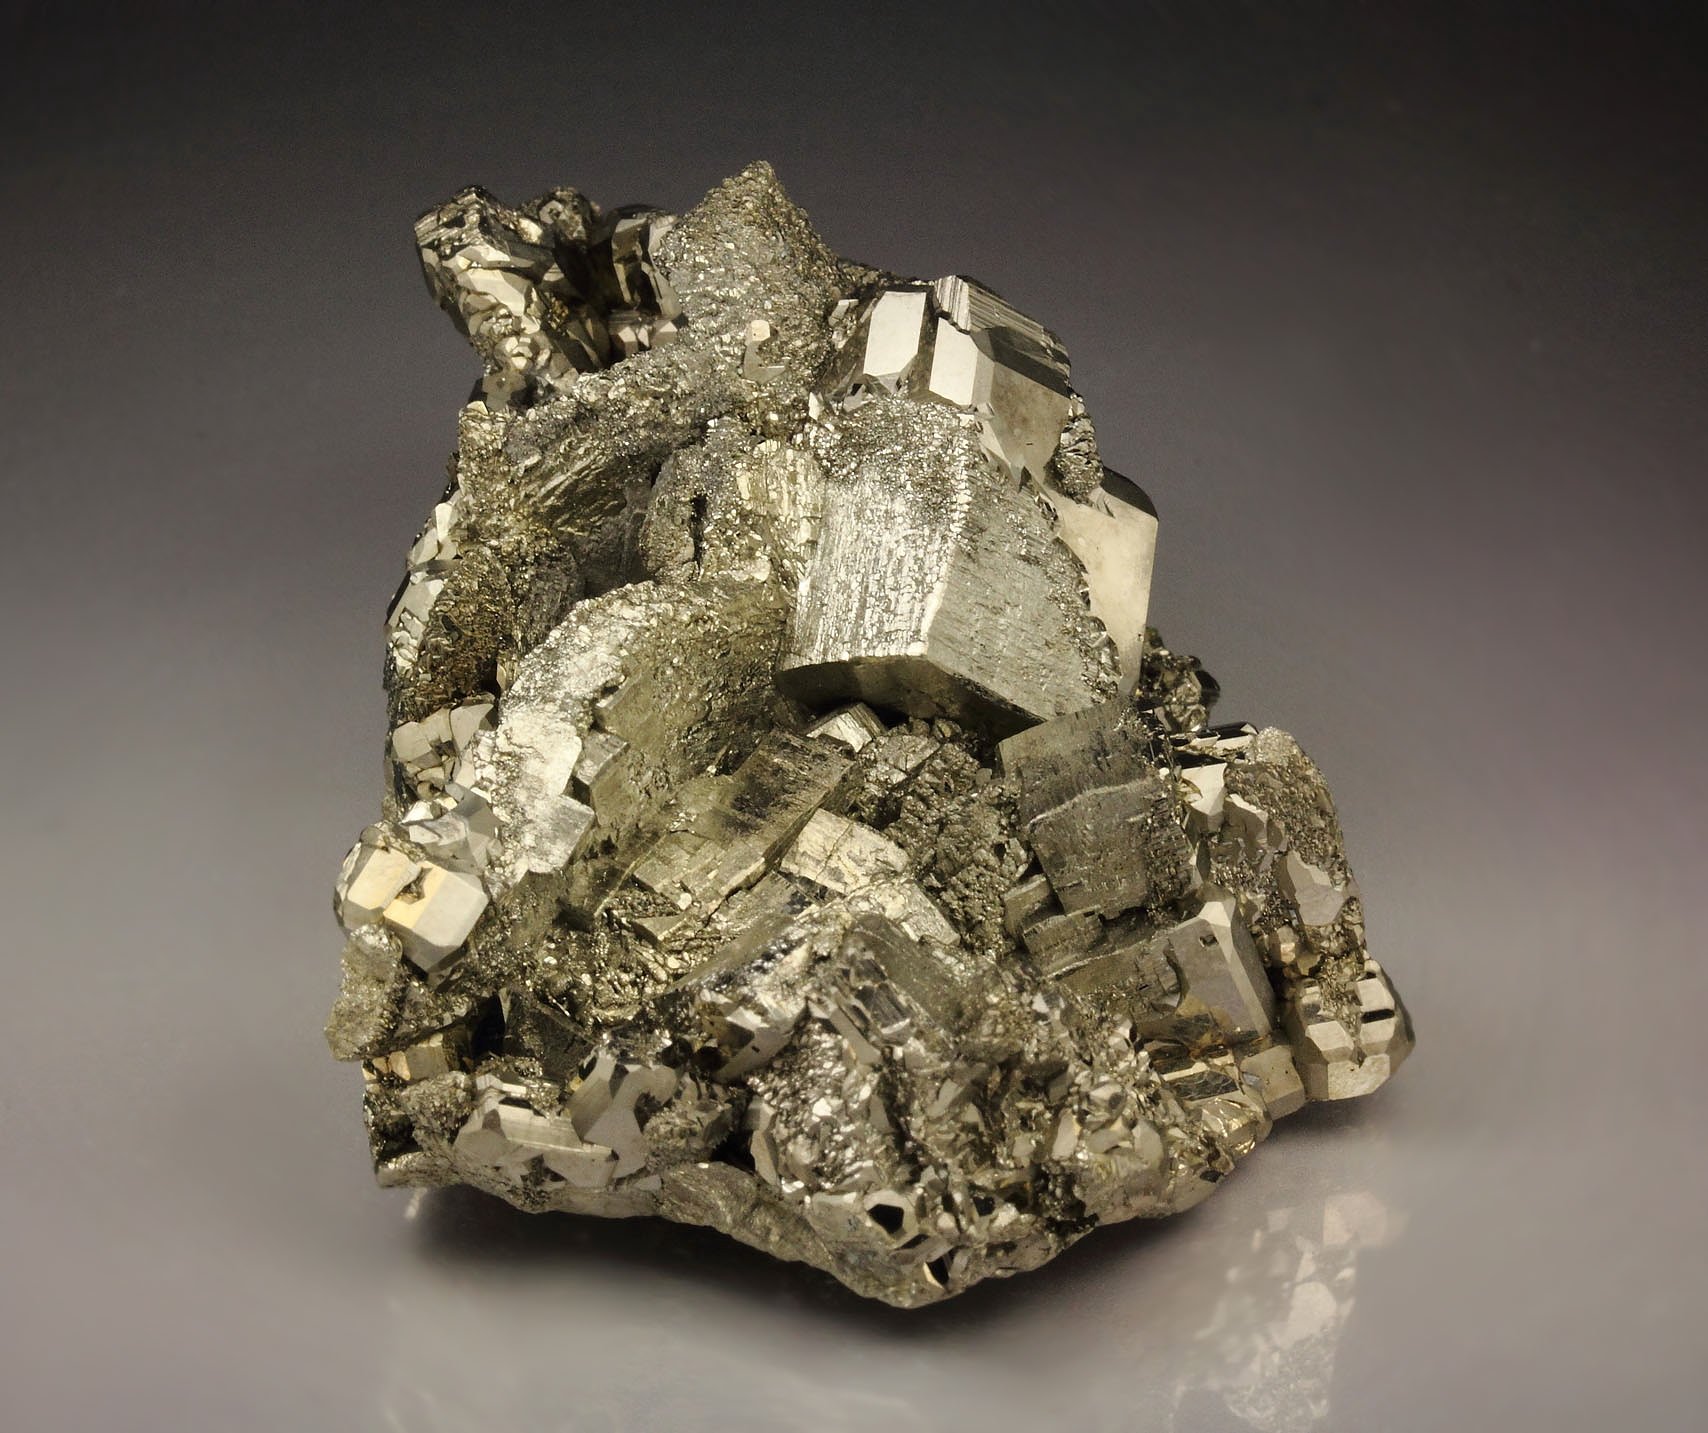 PYRITE pseudomorph after MARCASITE, epitaxial PYRITE